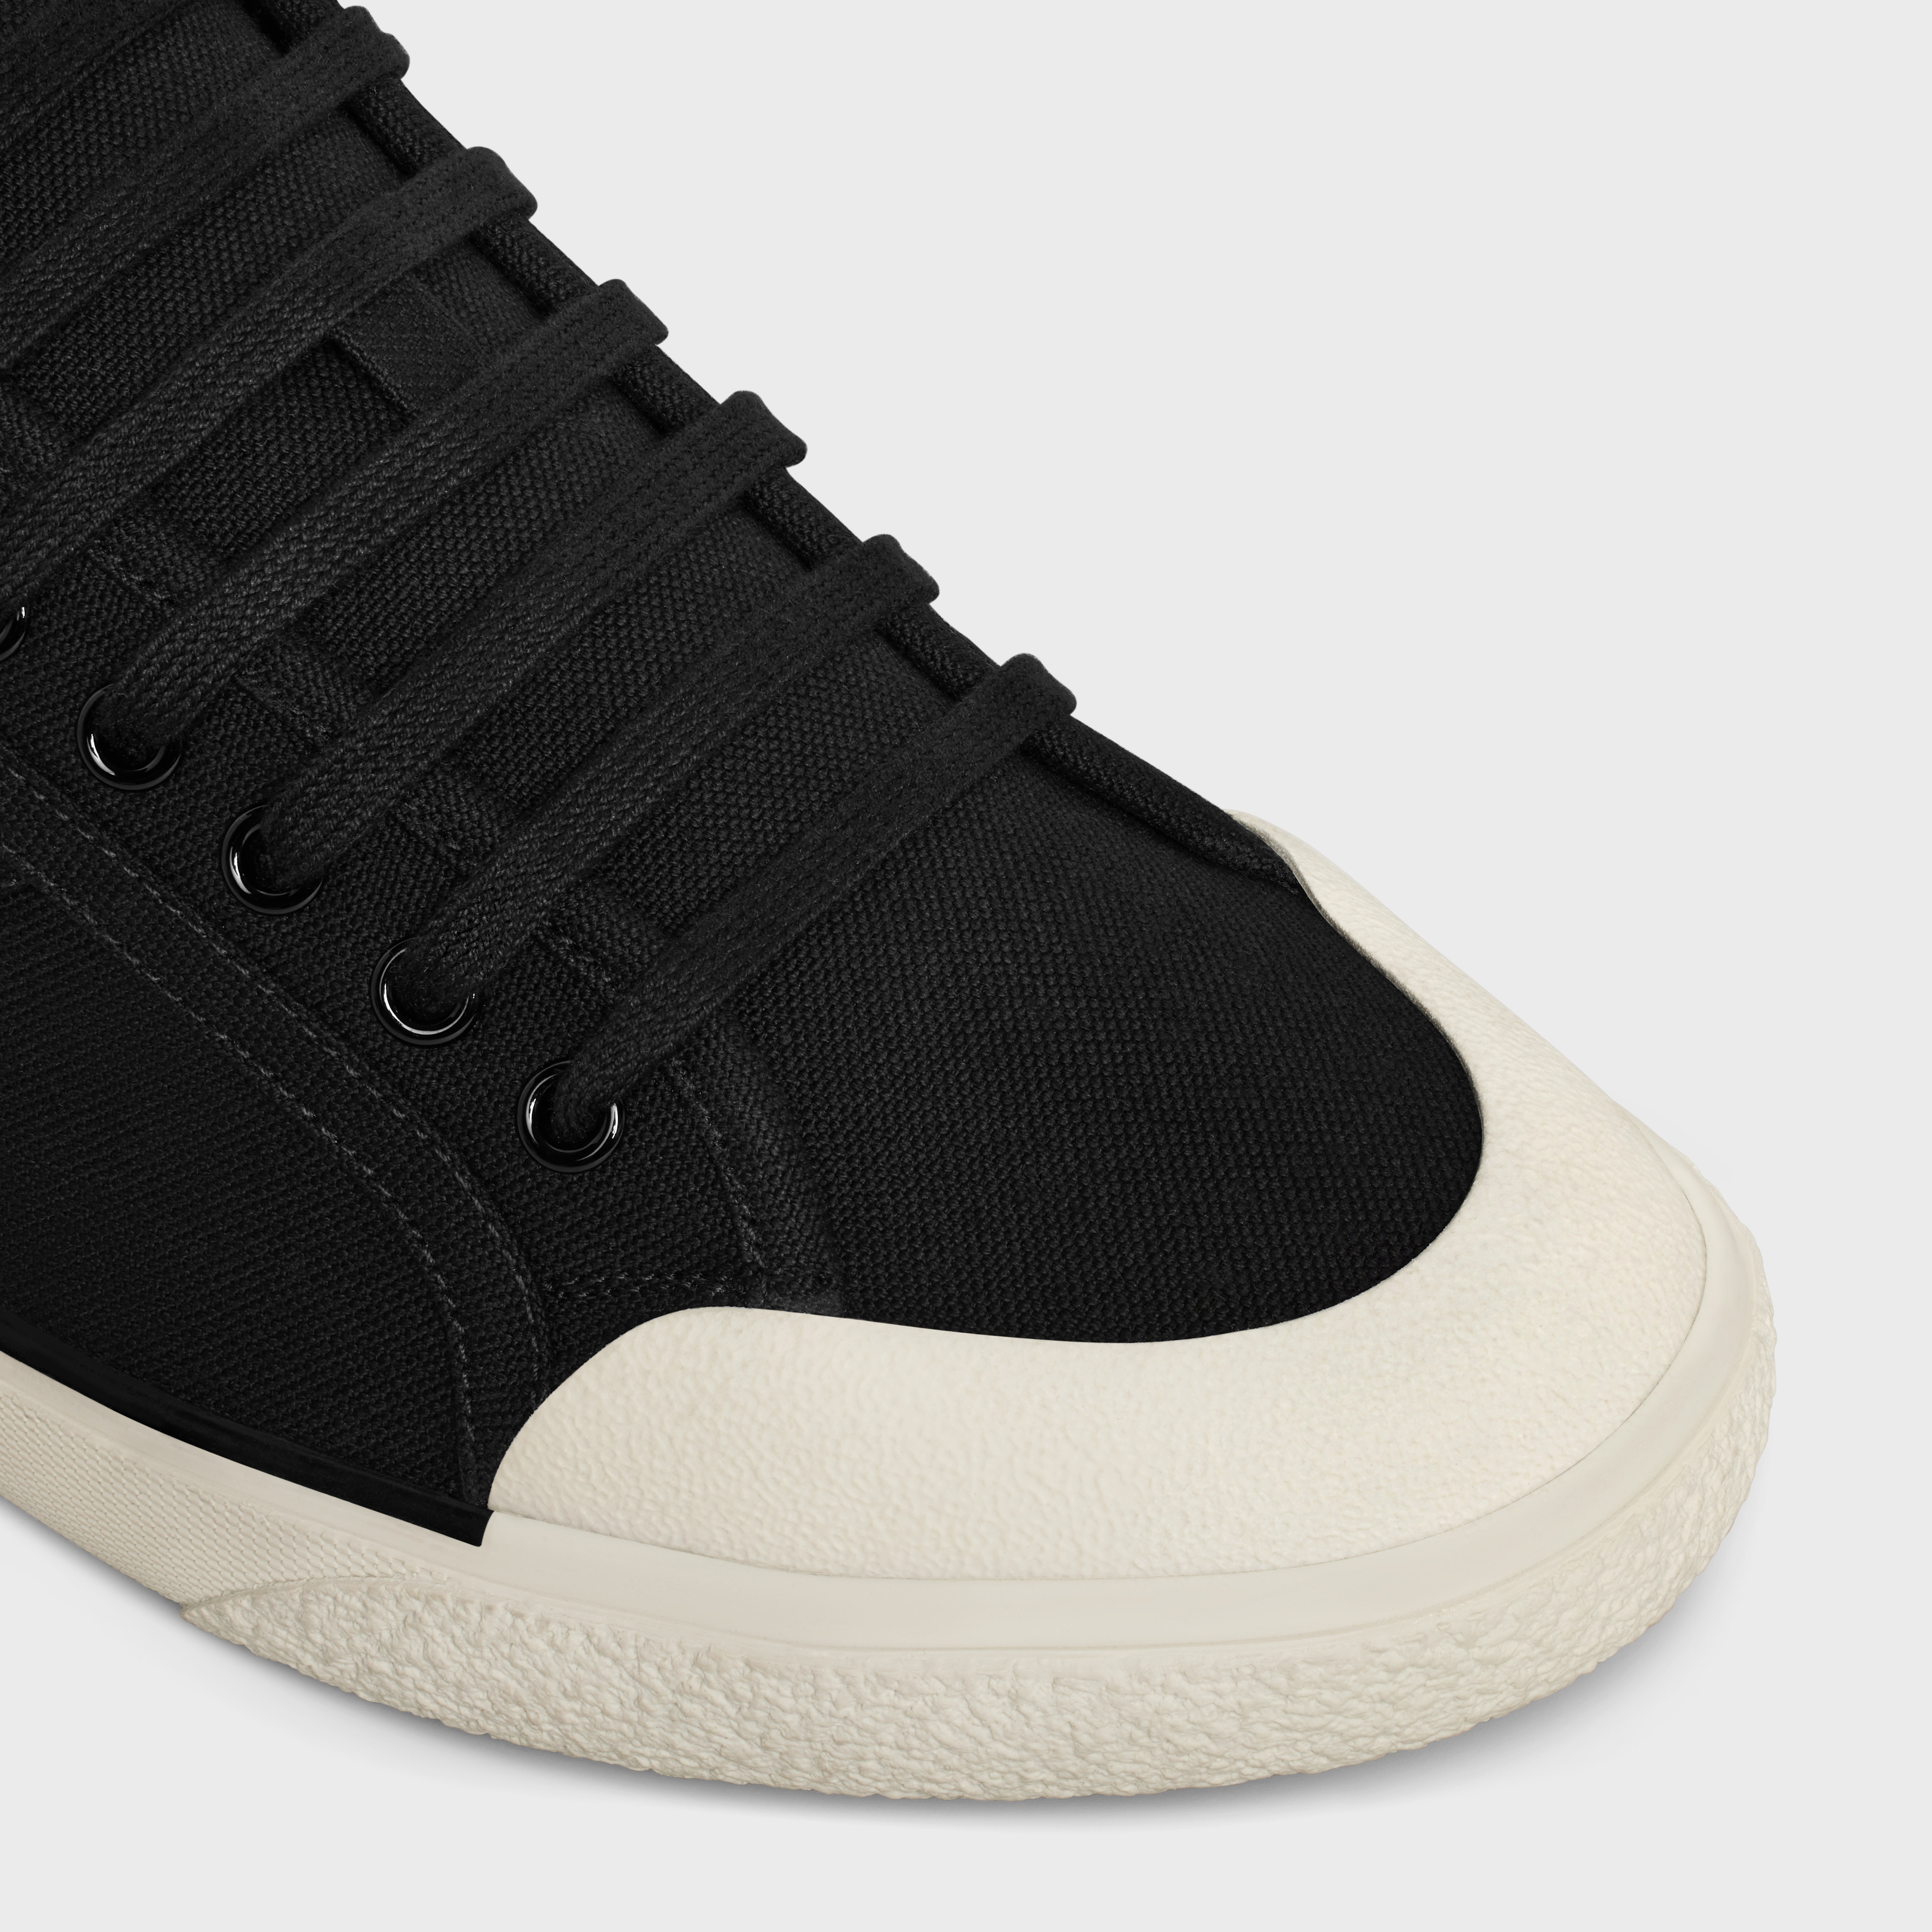 CELINE ALAN AS-01 LOW LACE-UP SNEAKER in CANVAS AND CALFSKIN - 4